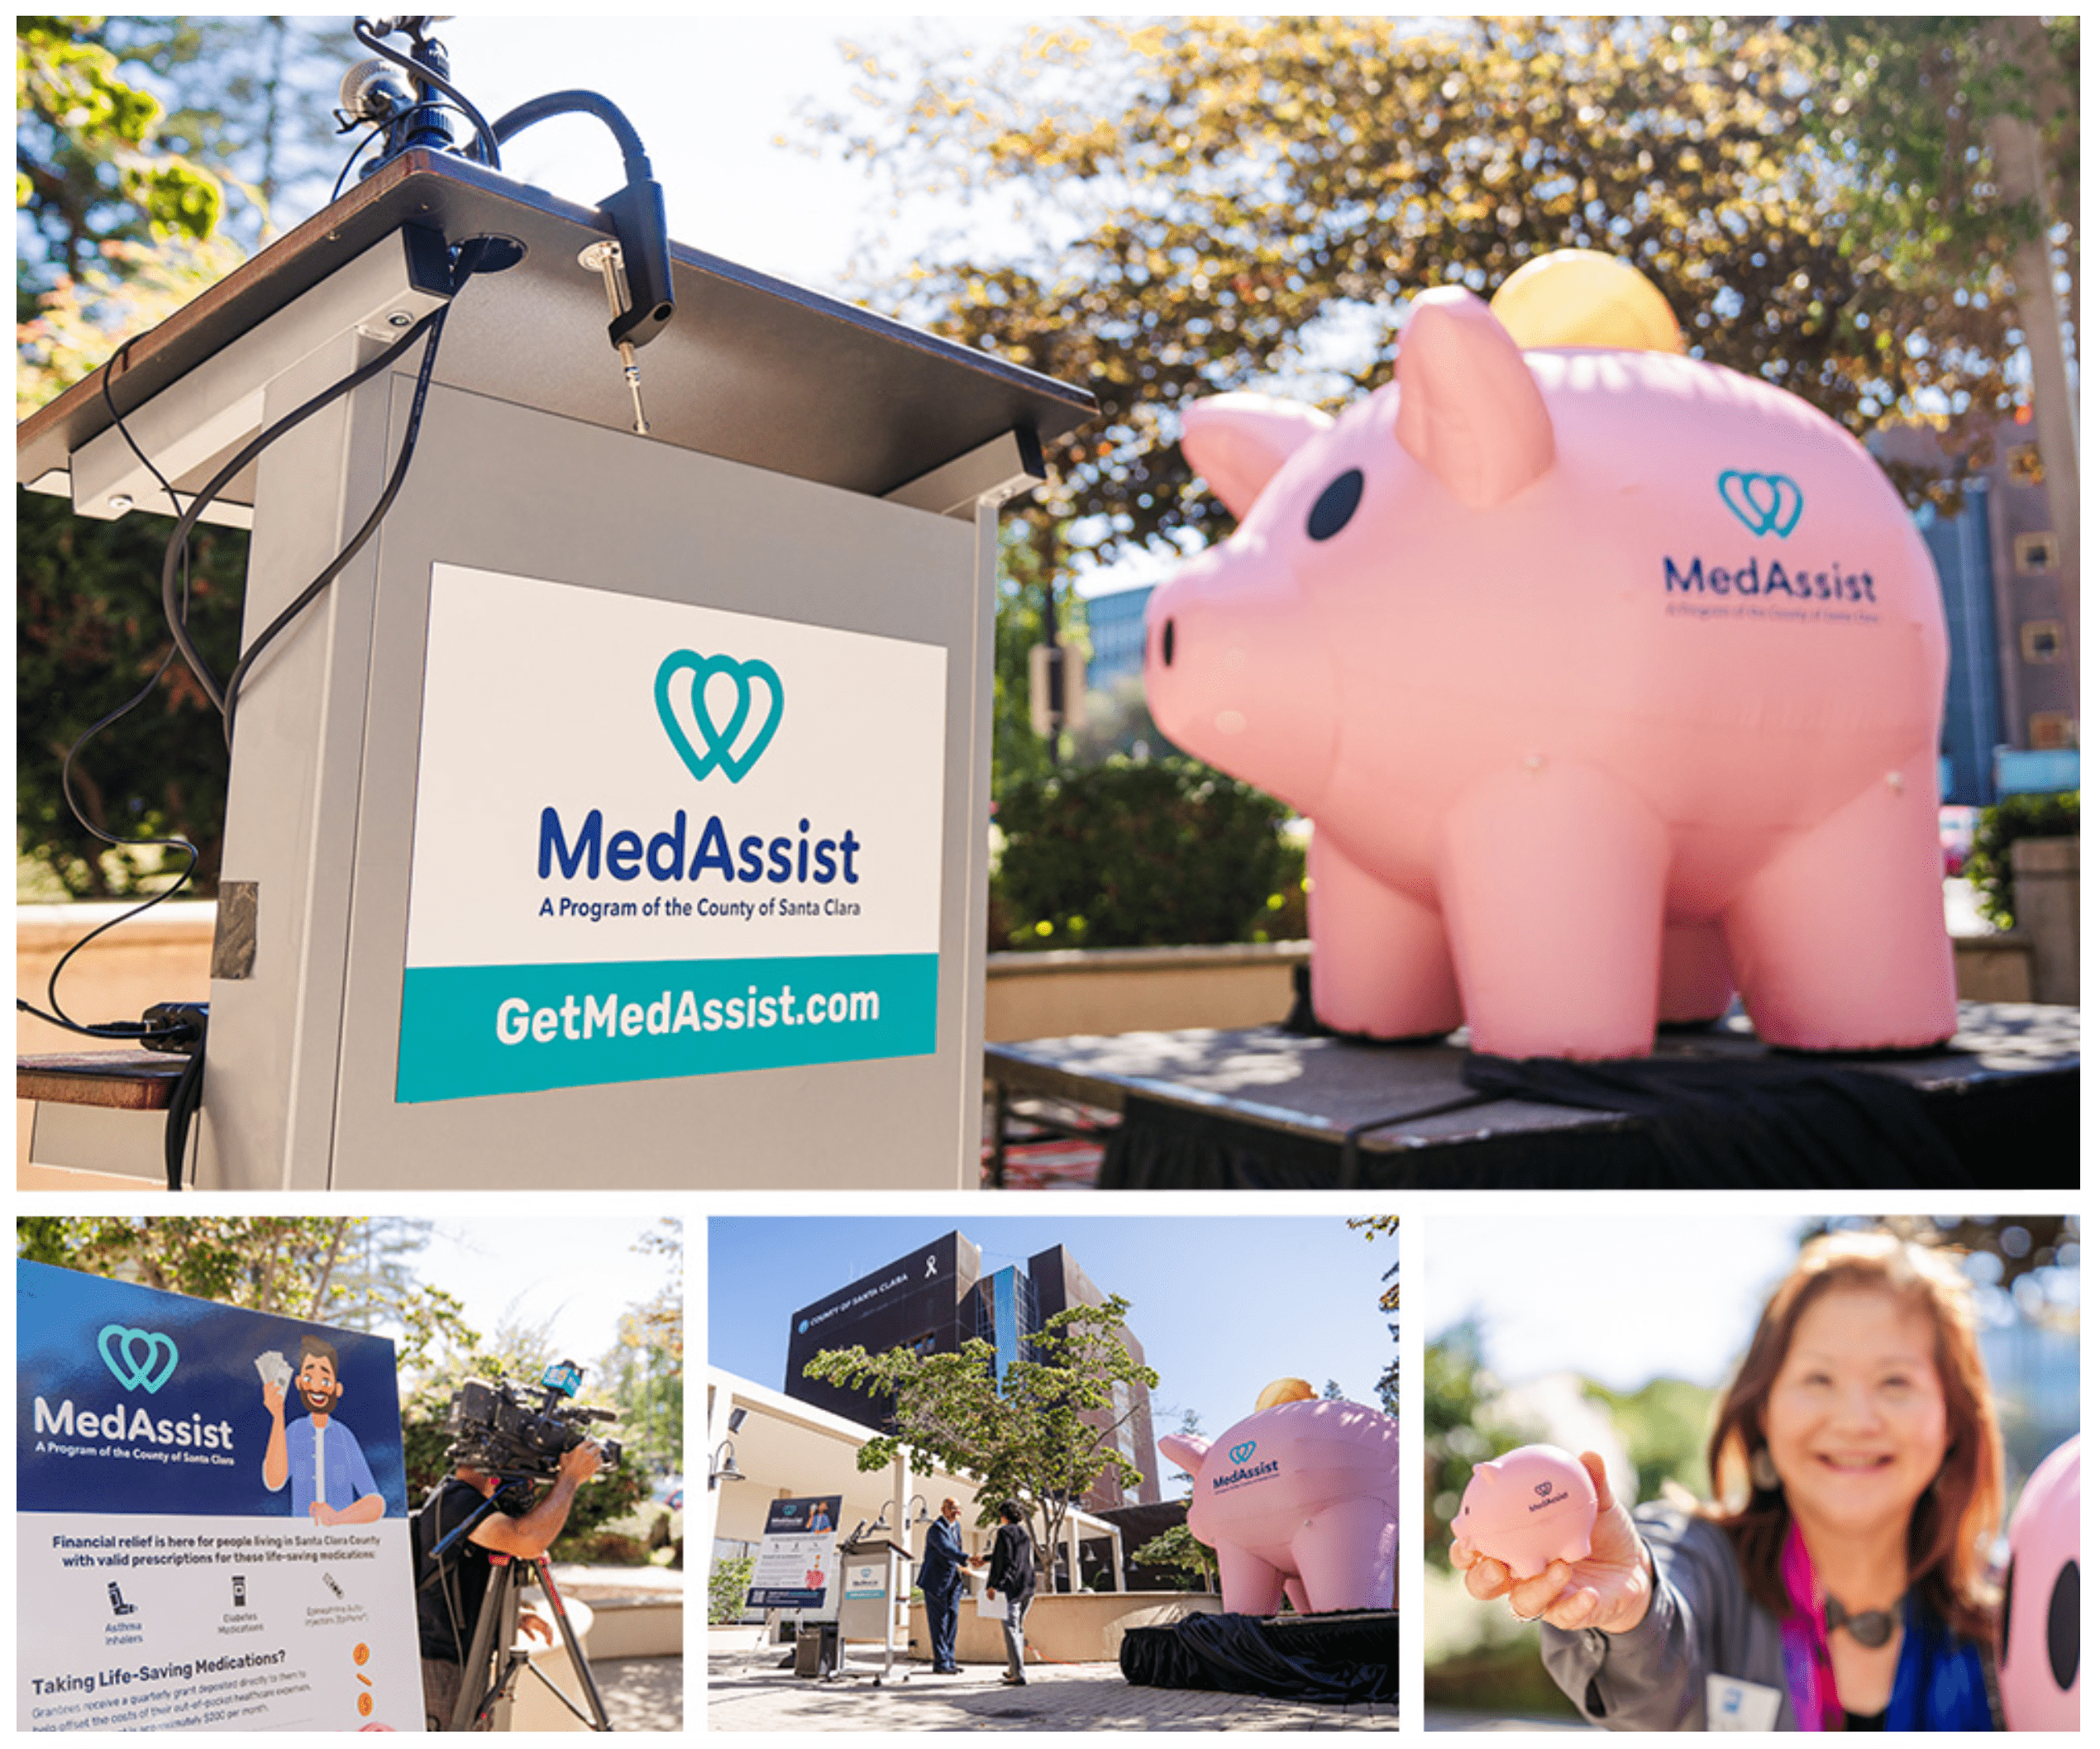 Images of the MedAssist Program's new brand launch press event in Santa Clara County